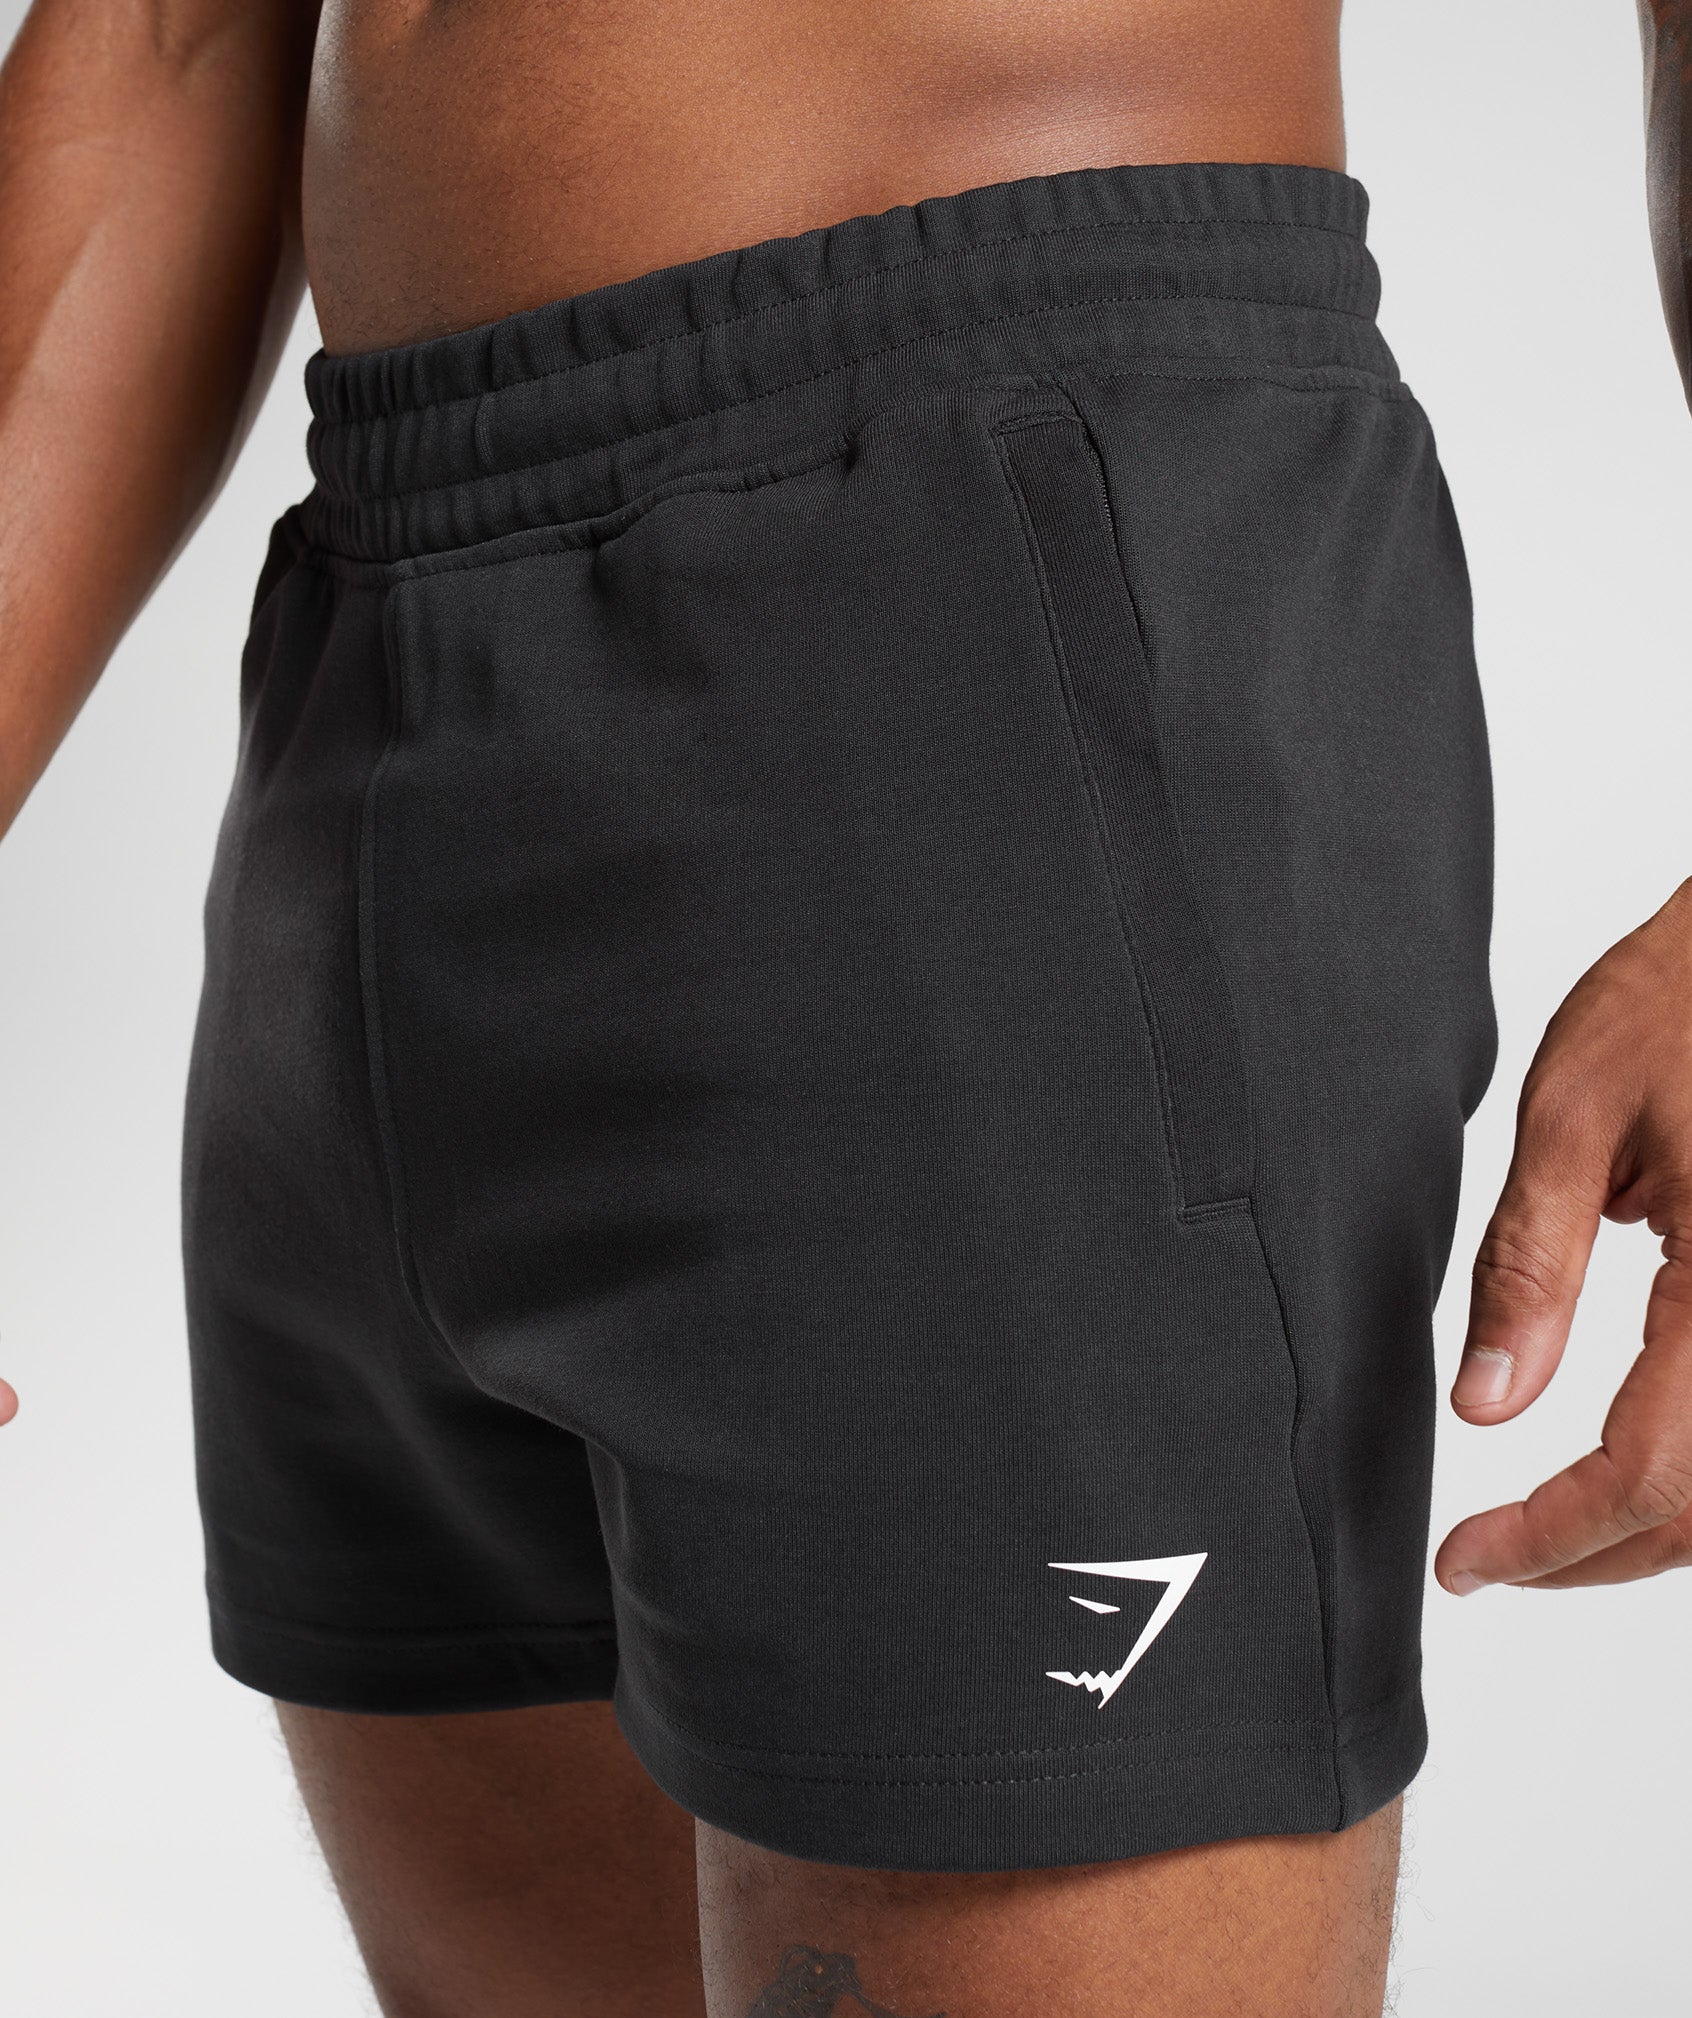 React 5" Shorts in Black - view 5